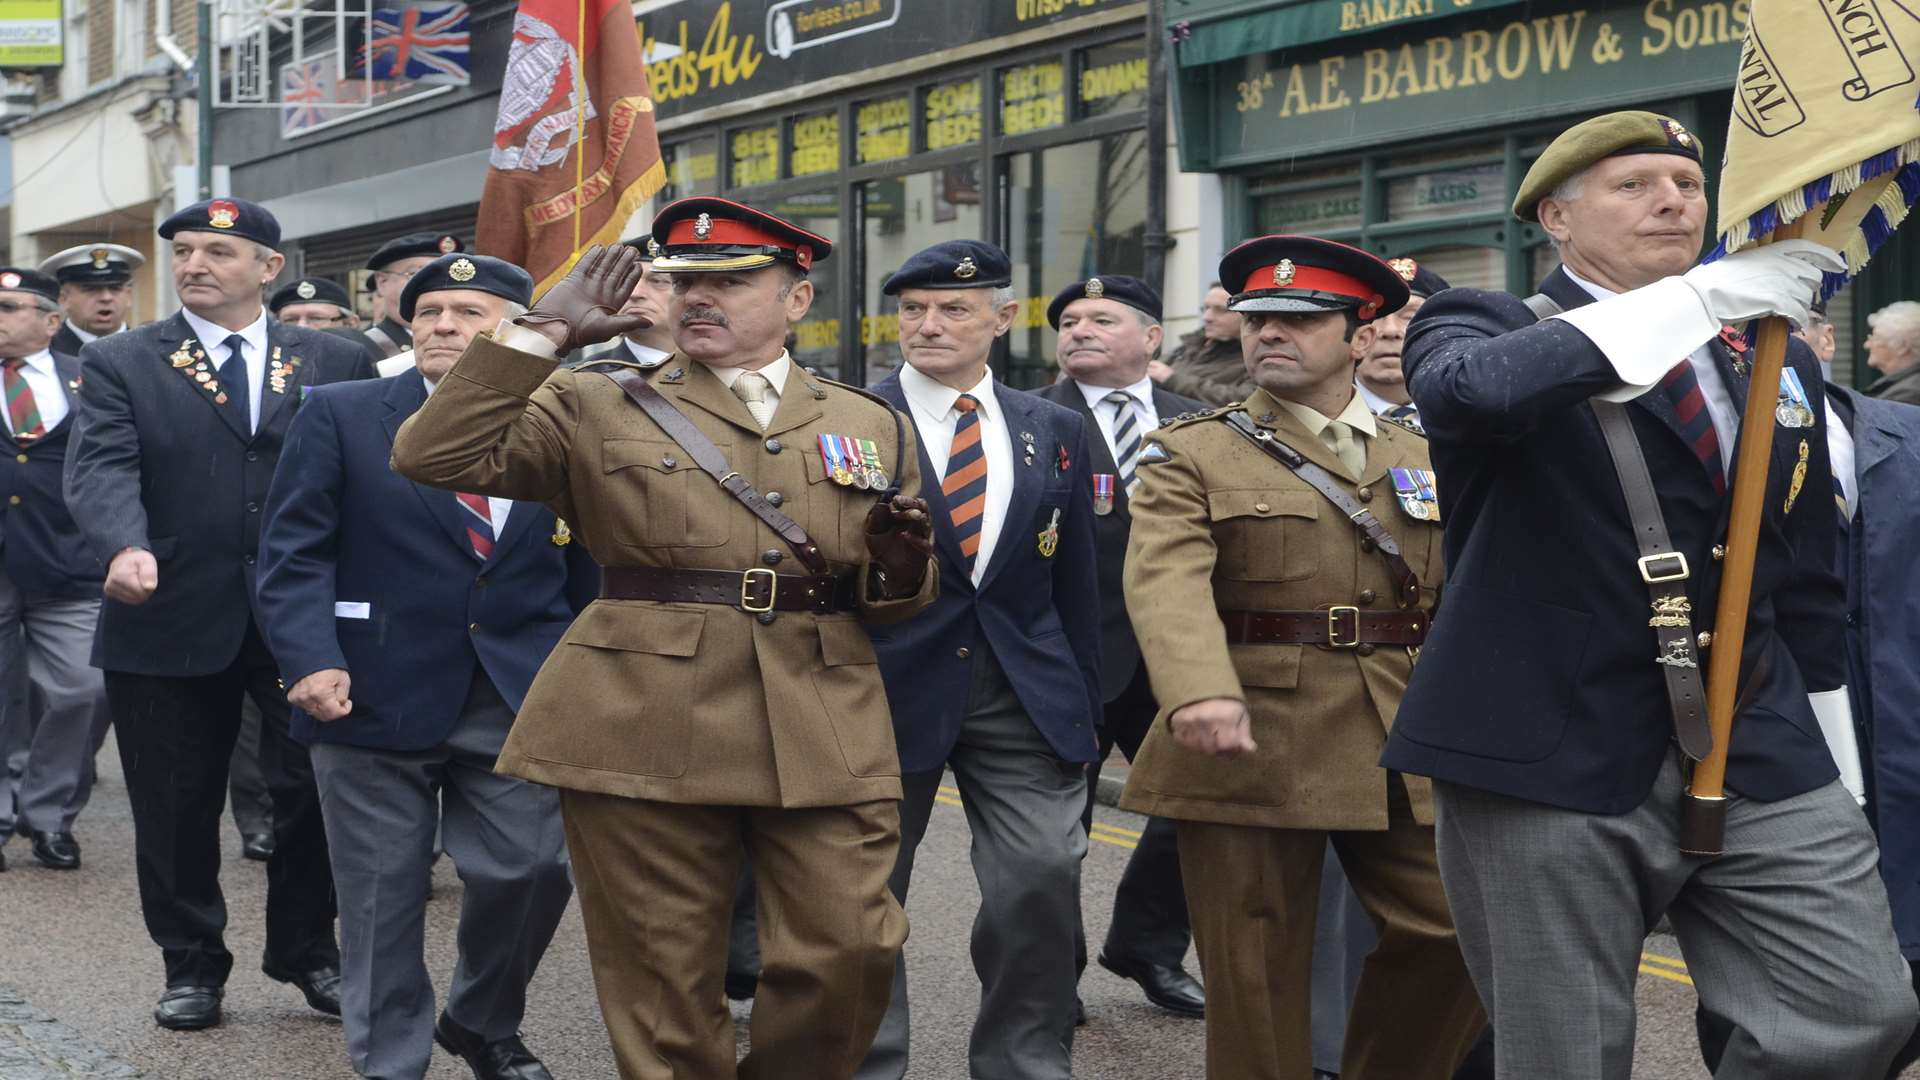 A Remembrance Day parade through Sittingbourne High Street last year